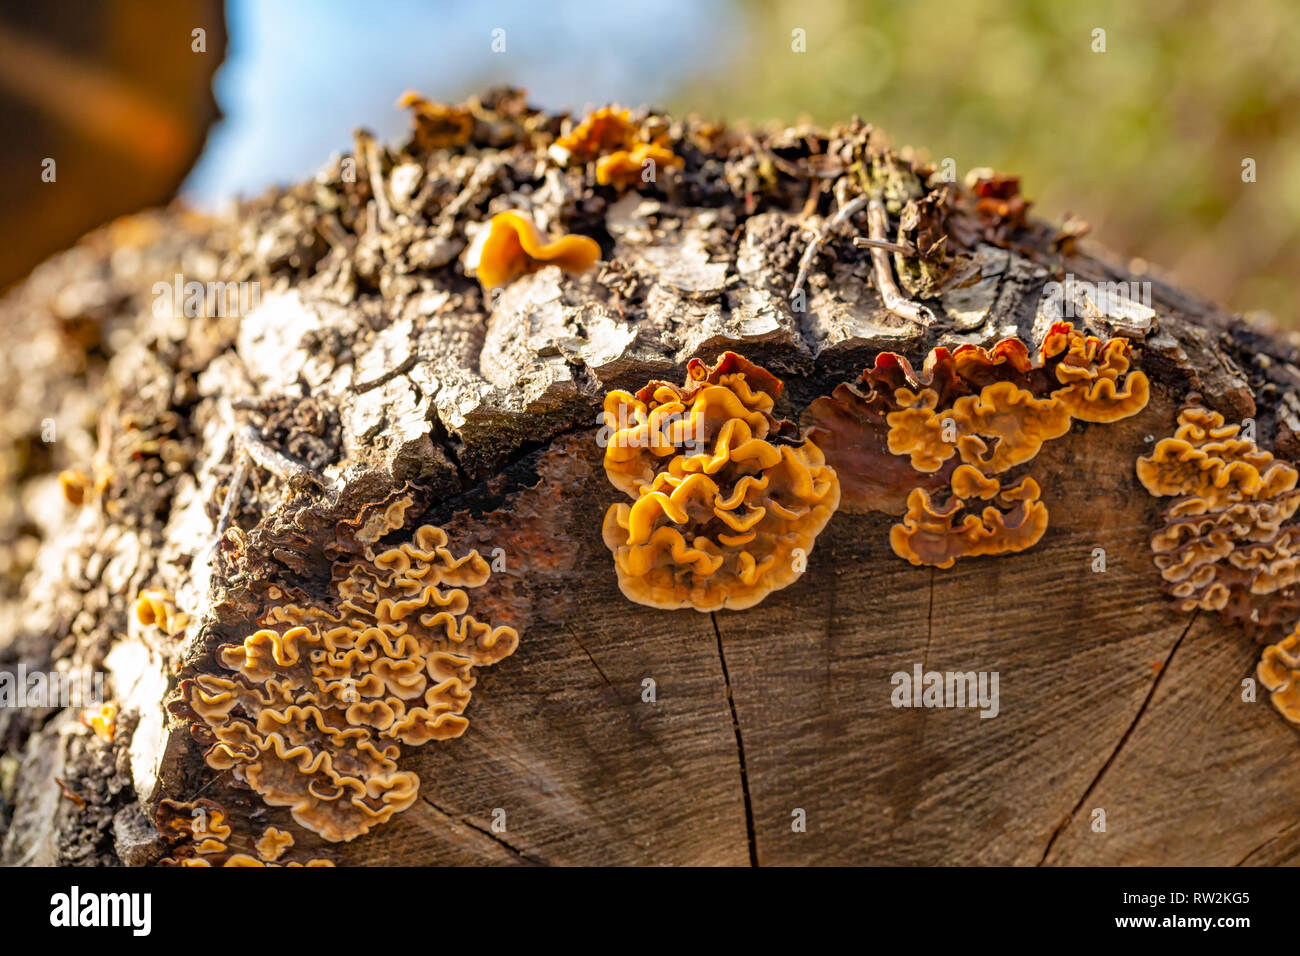 Close-up photograph of Hairy curtain crust (Stereum hirsutum) found on cut cross-section of Pine log. Stock Photo